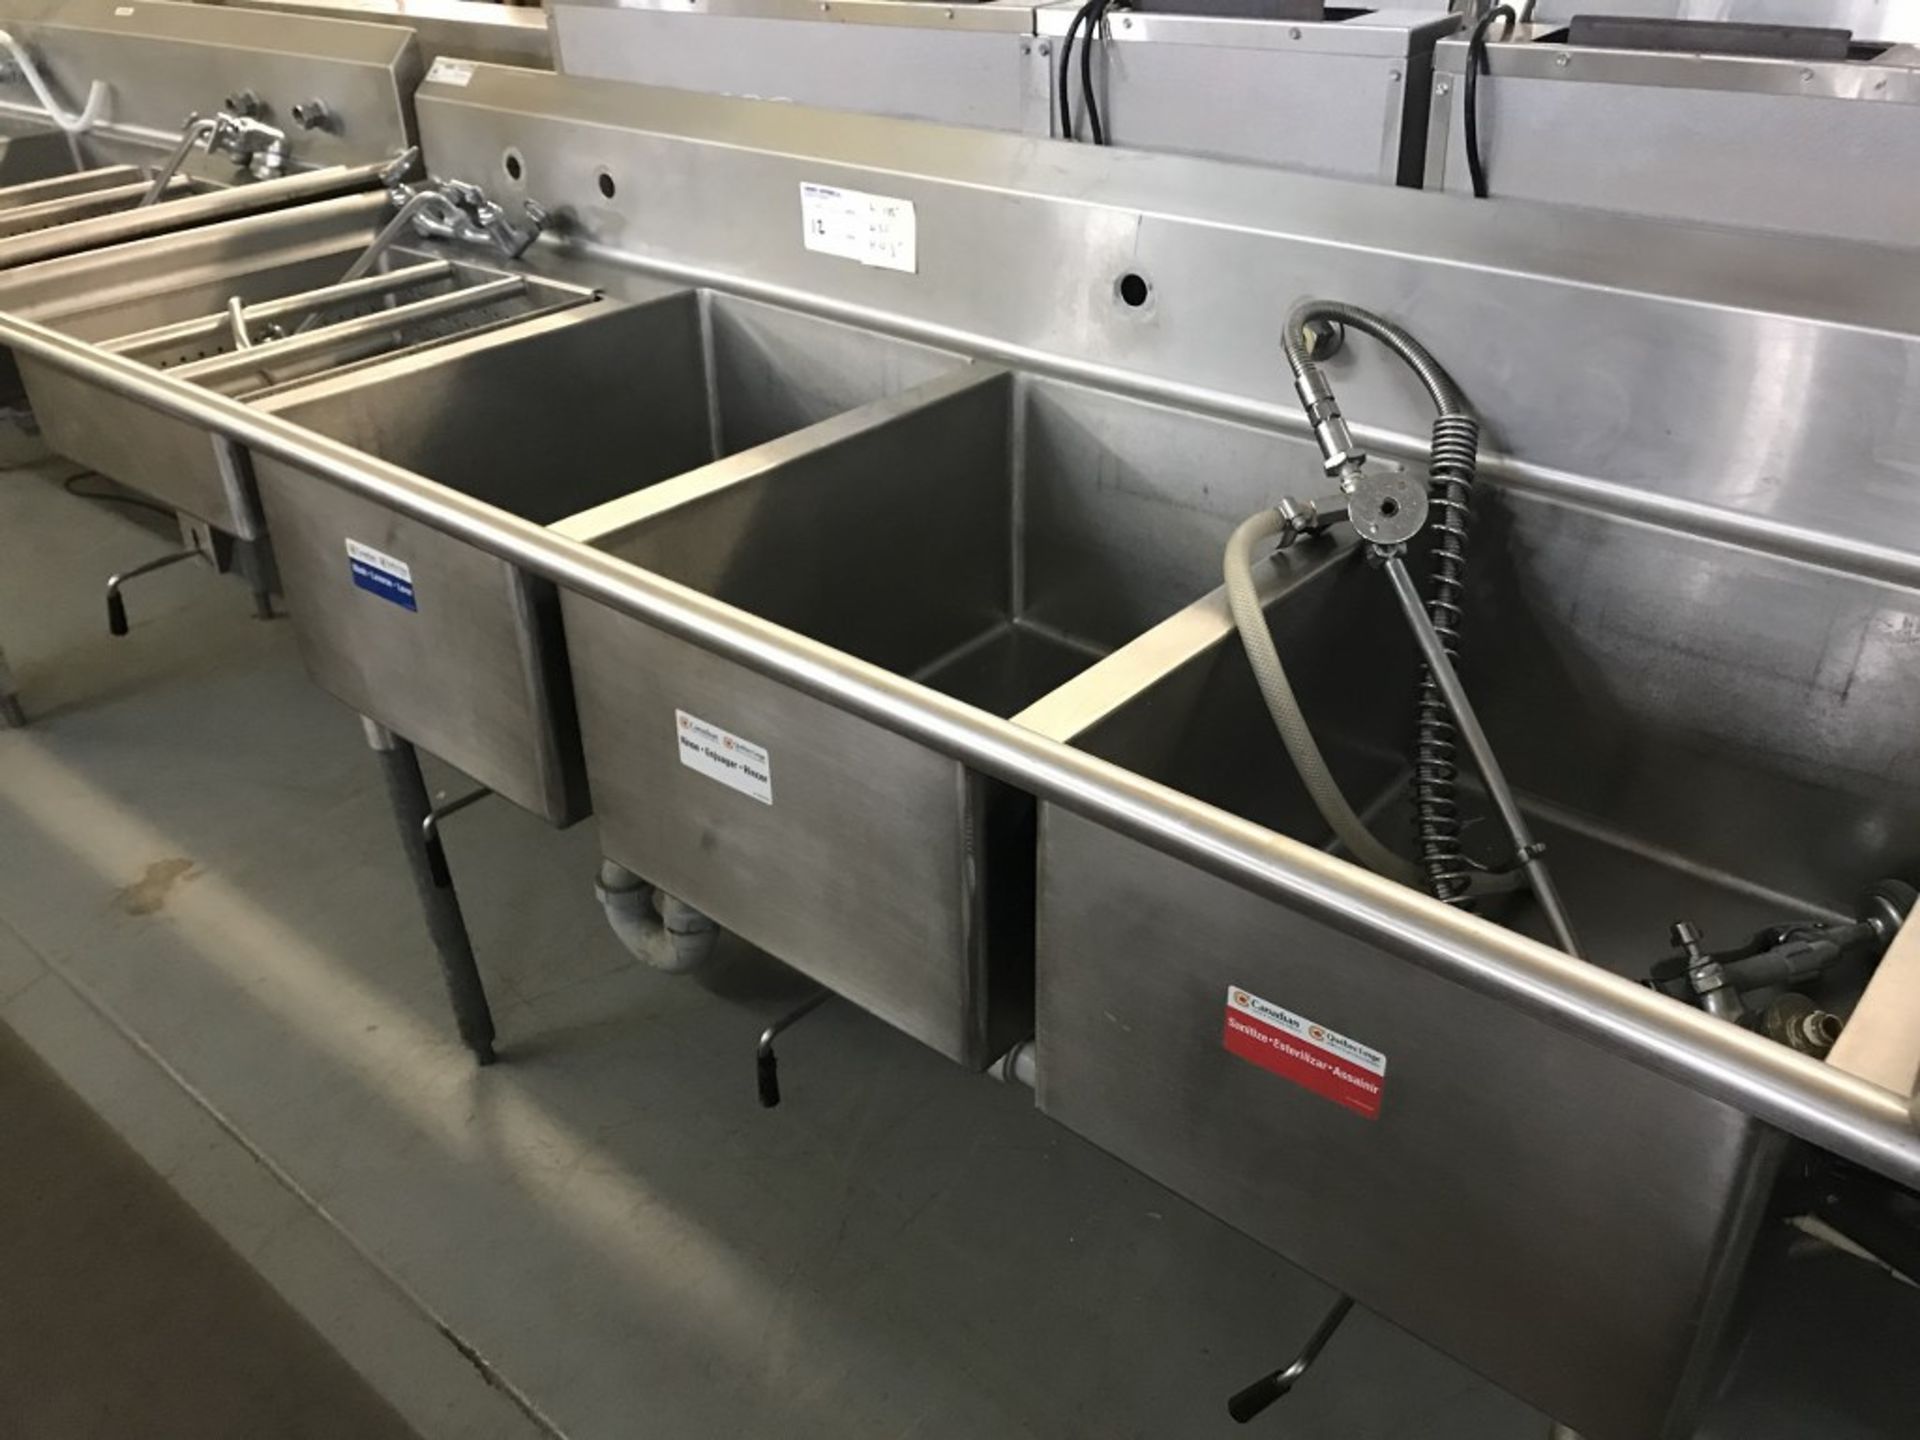 3 WELL - STAINLESS STEEL WASH SINK. 105"L X 30"W X 41.5"H - Image 3 of 6